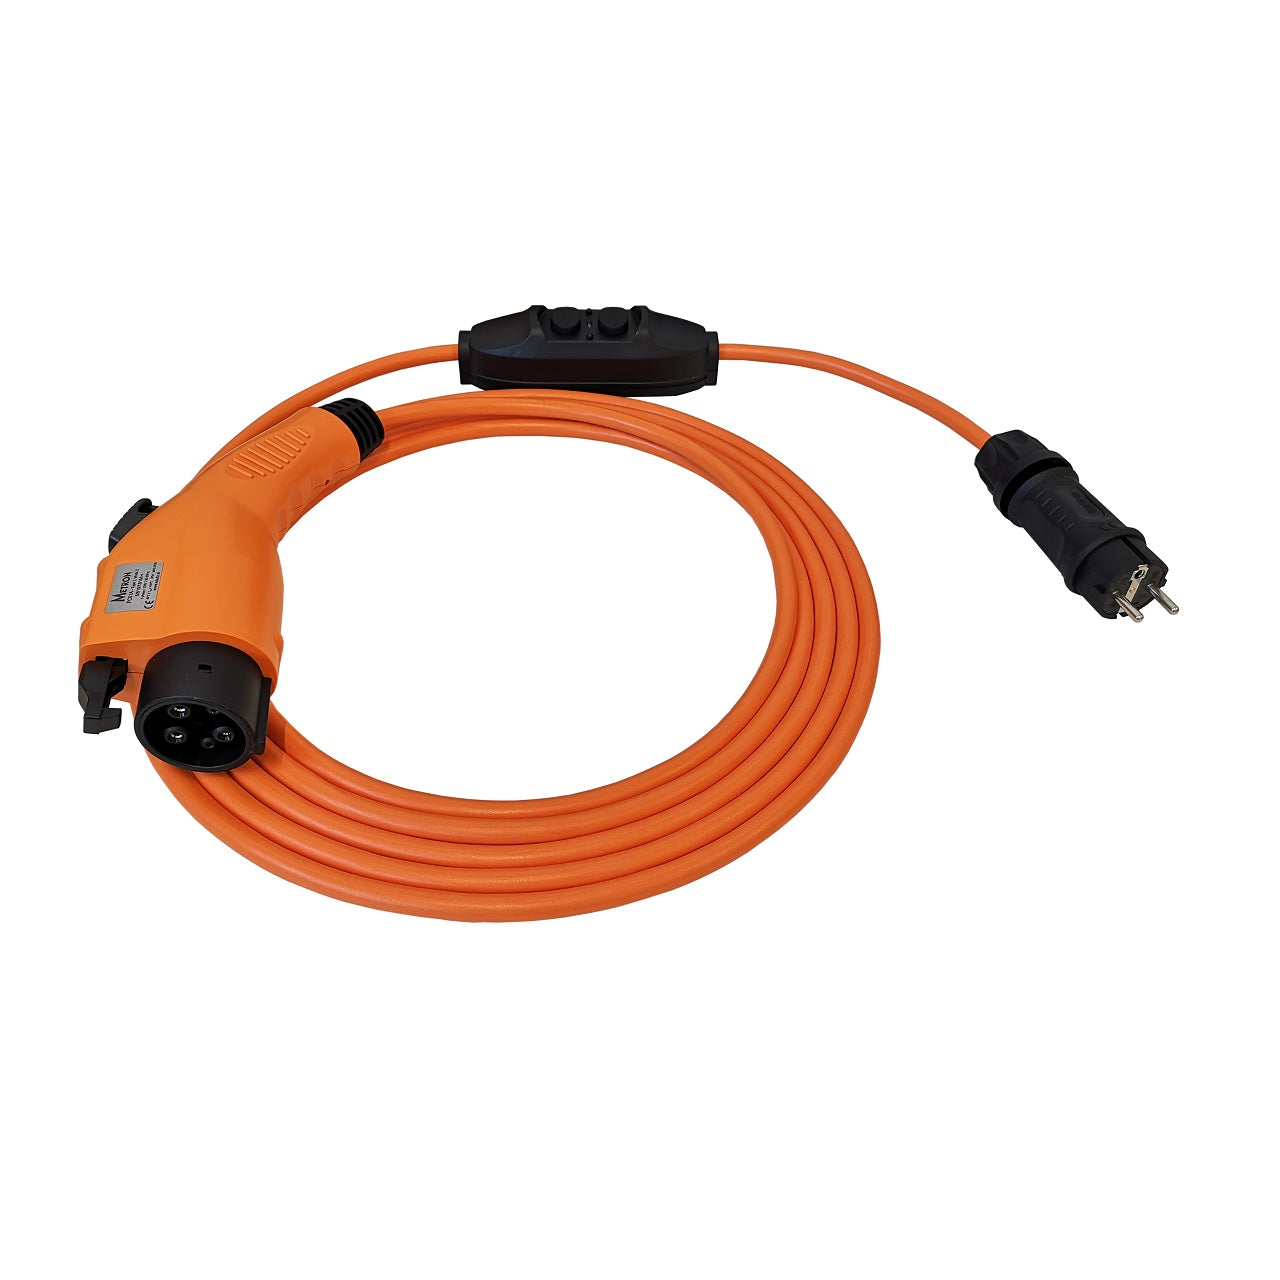 MENNEKES charging cable, 35201100006, Schuko plug to Type 2 (8